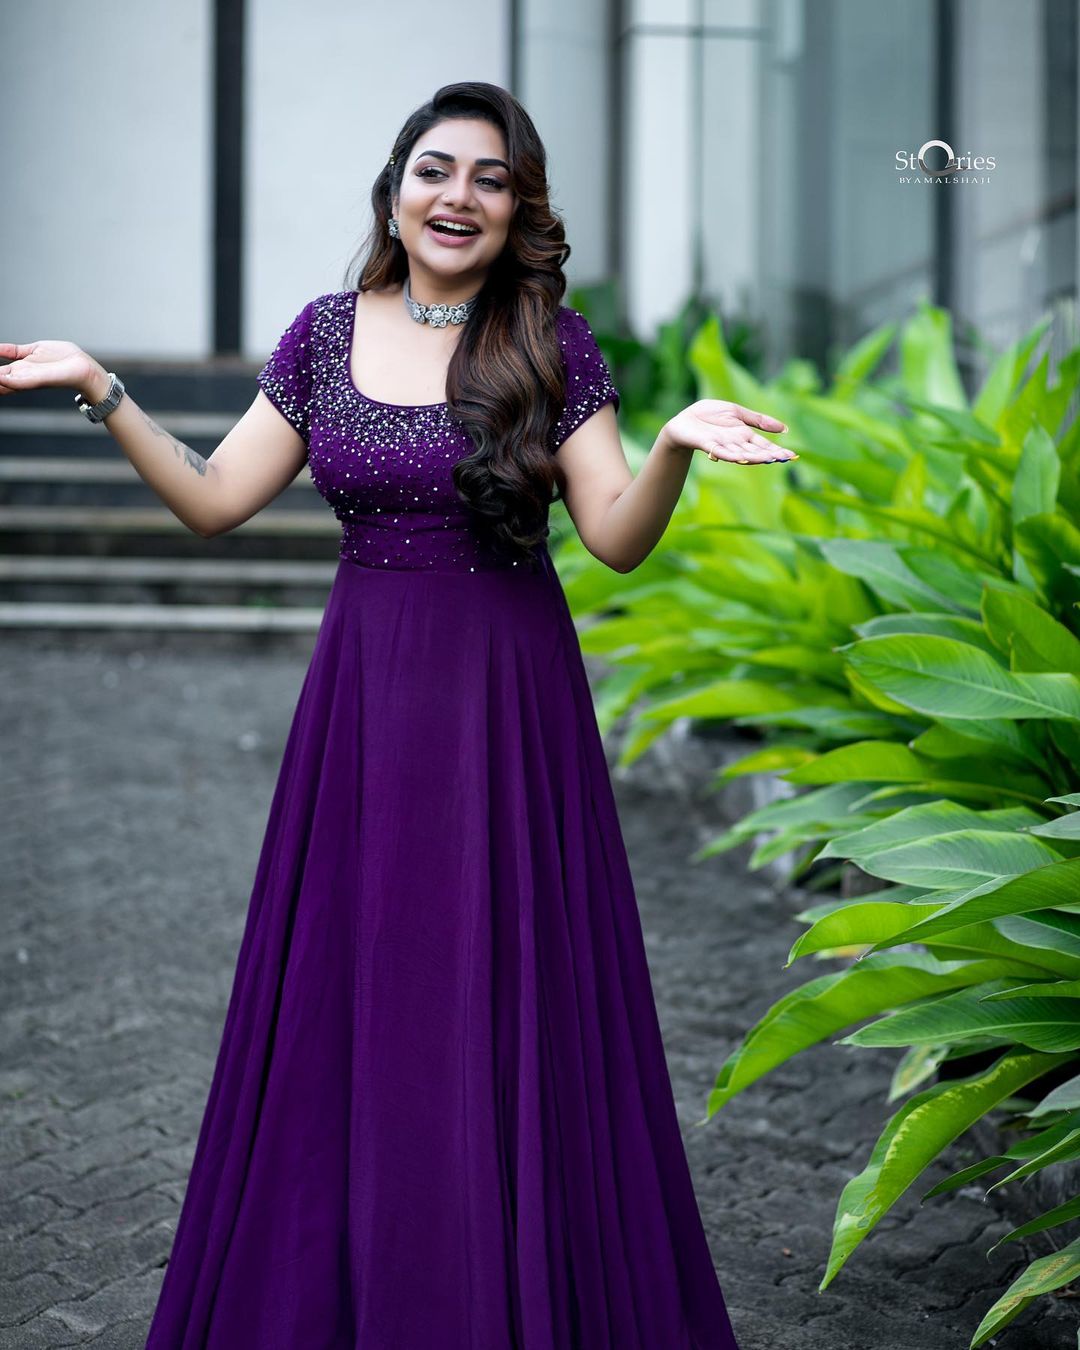 Rimi tomy looking very glamorous photos gallery Photos: HD Images,  Pictures, Stills, First Look Posters of Rimi tomy looking very glamorous  photos gallery Movie - Mallurepost.com